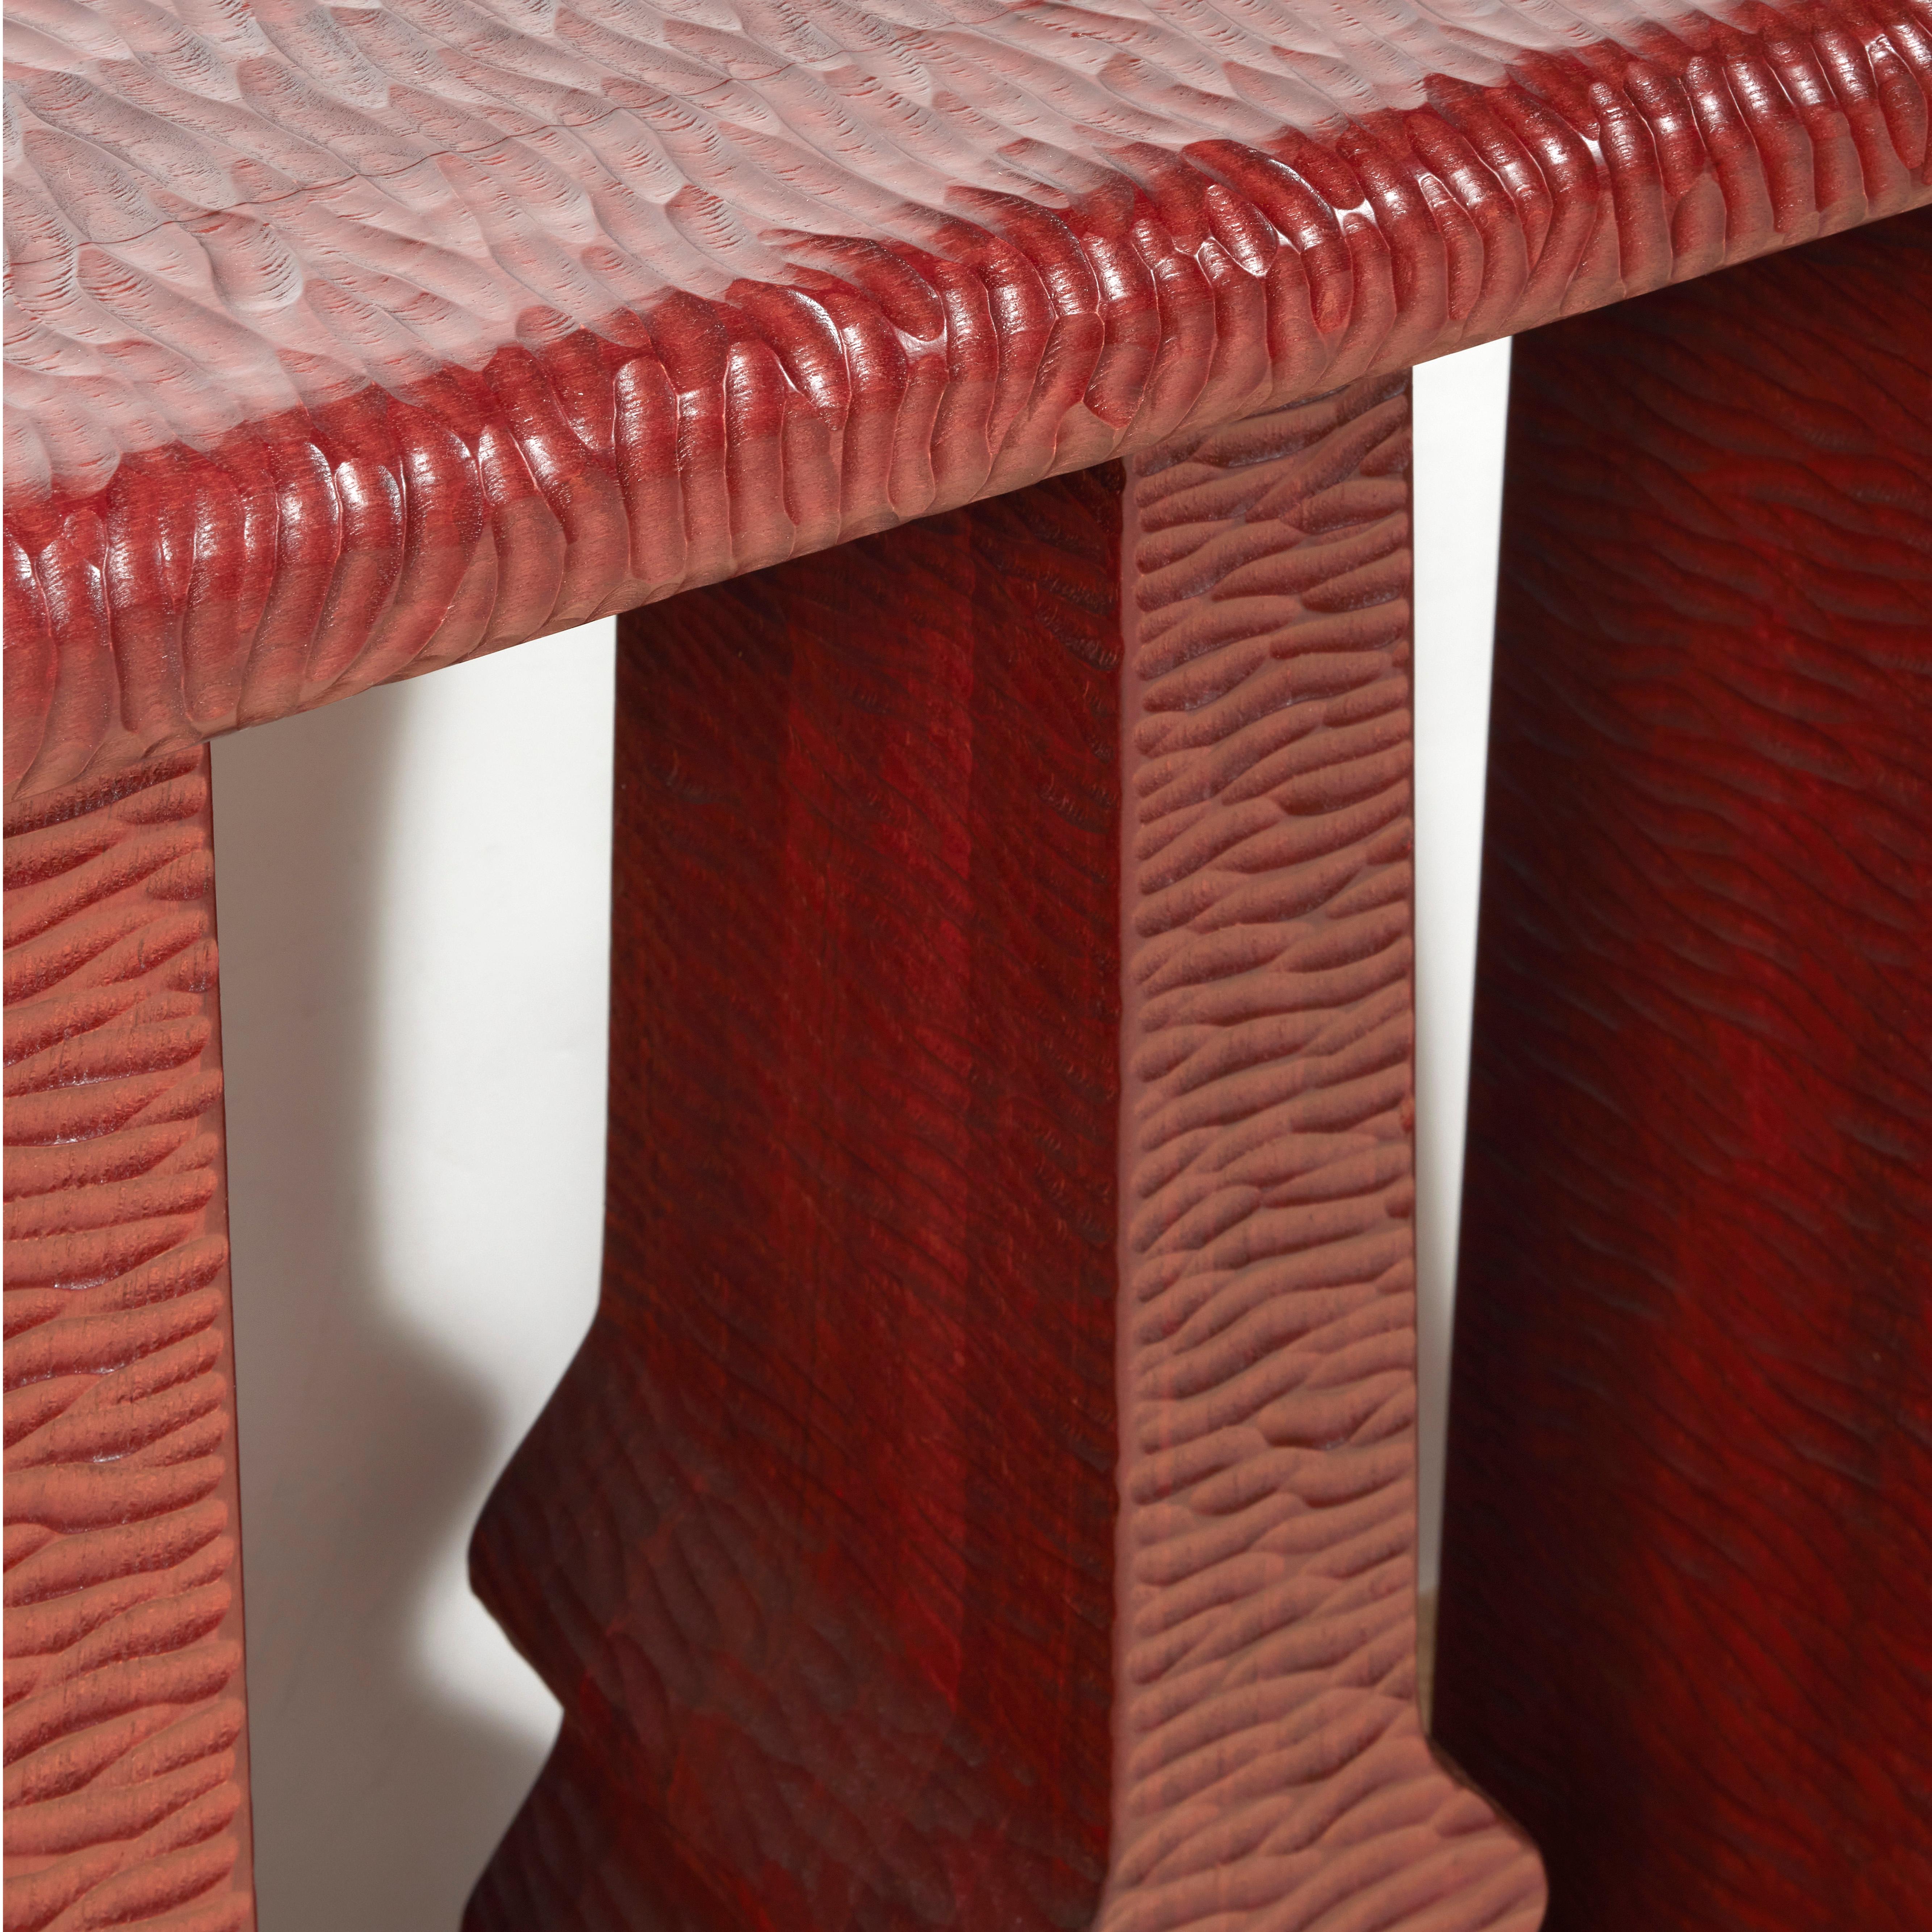 Five legged console table in red tinted walnut completely gouged by hand.